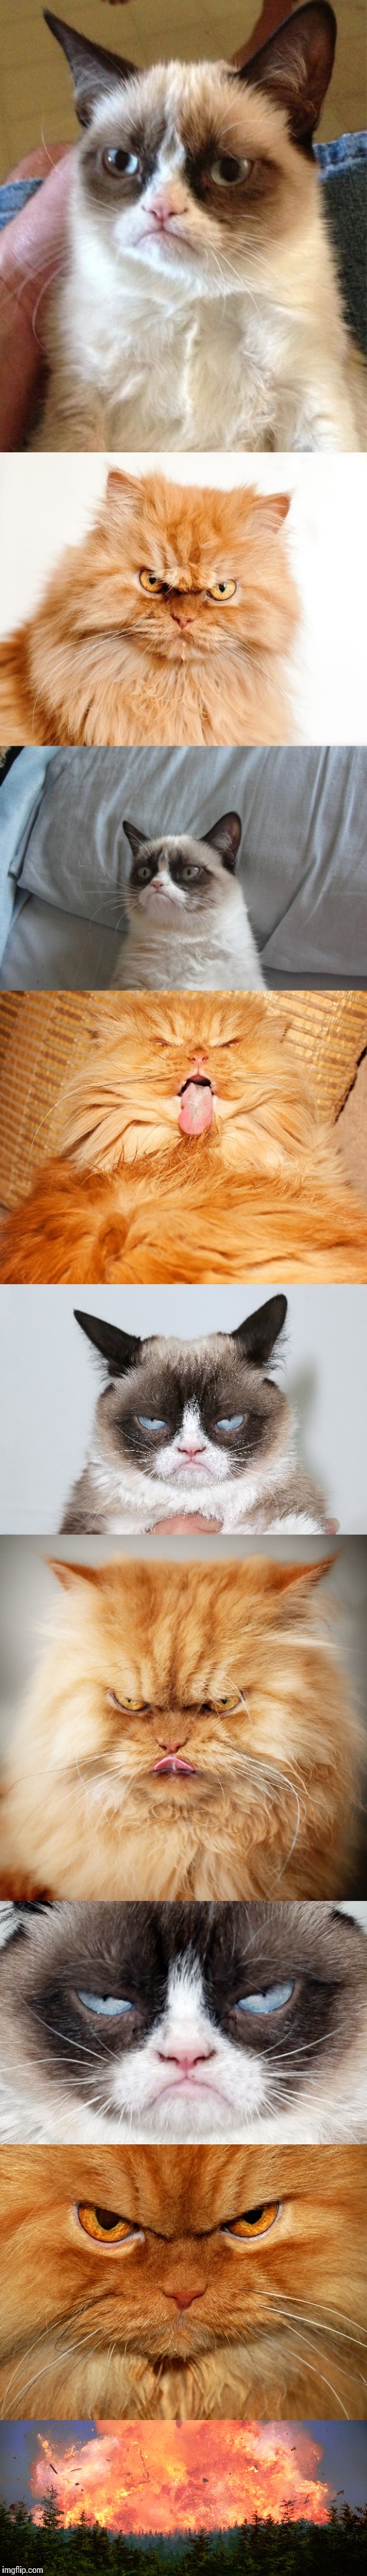 Grumpy cat vs Angry cat | image tagged in memes,cats | made w/ Imgflip meme maker